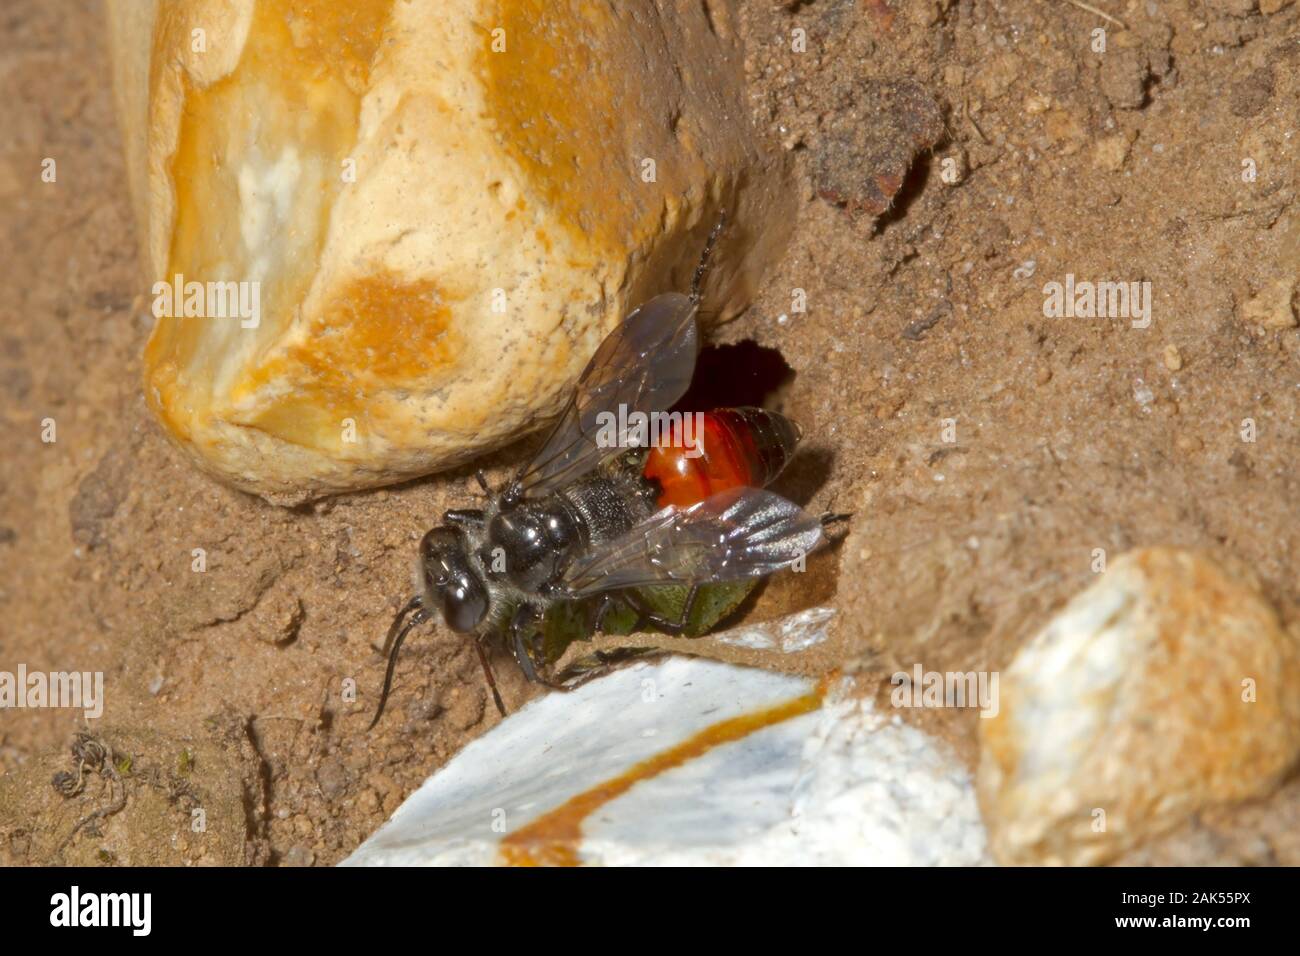 Astata boops - a species of solitary predatory wasp Stock Photo